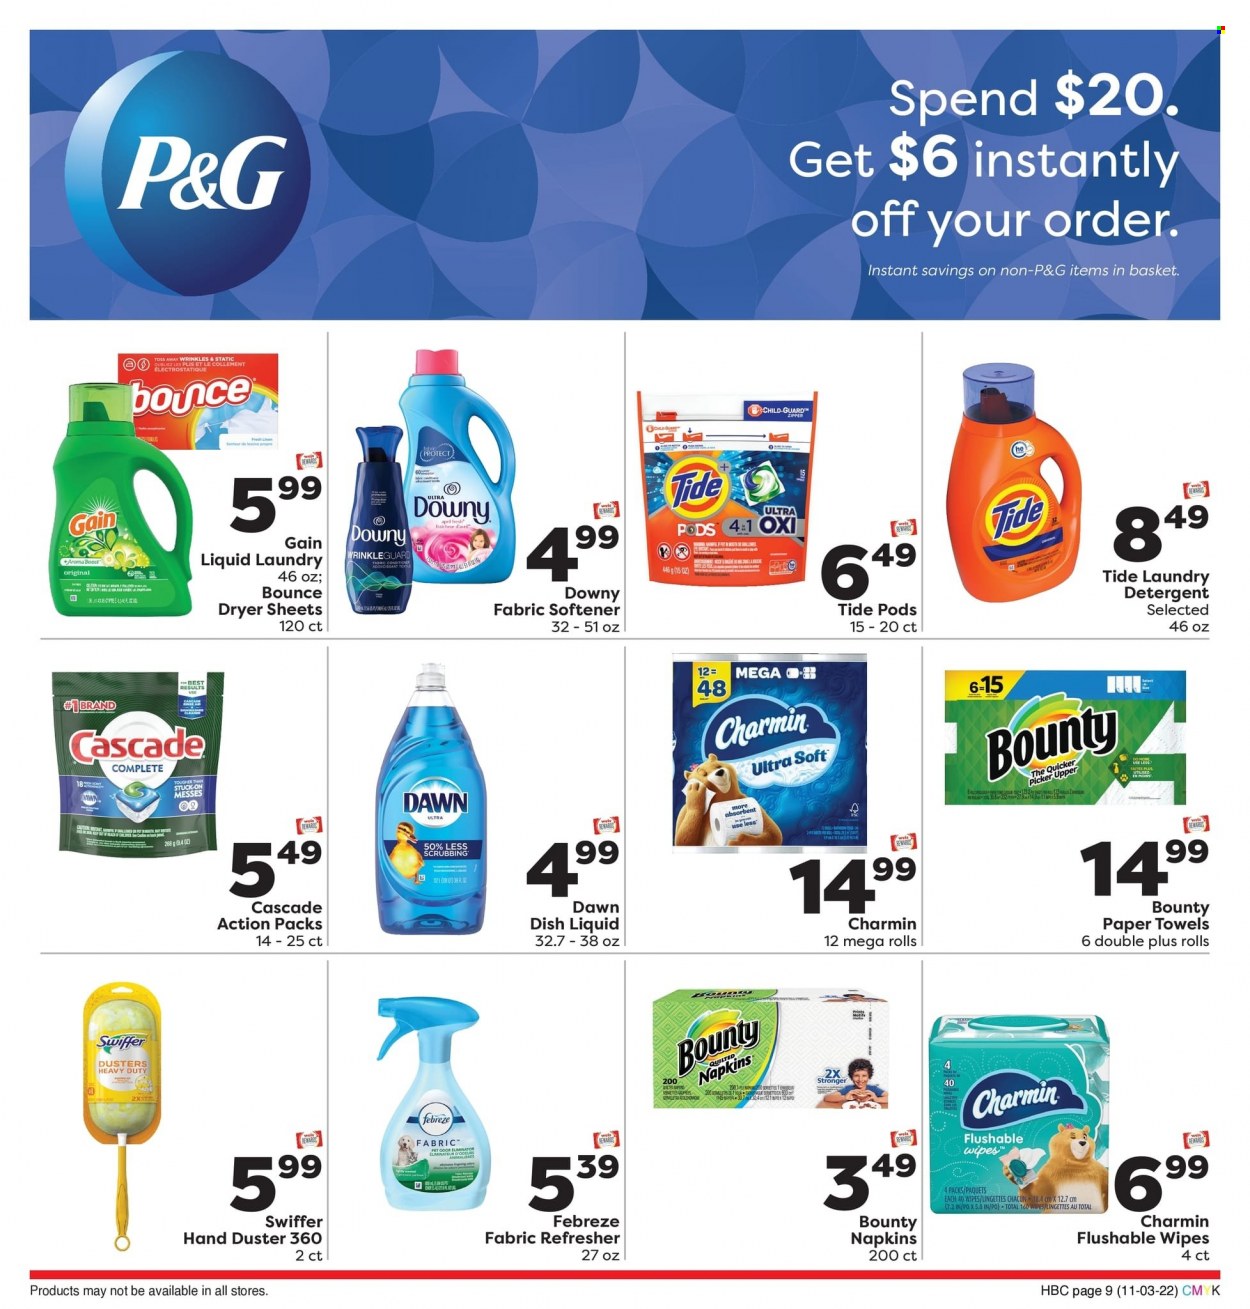 thumbnail - Weis Flyer - 11/03/2022 - 11/30/2022 - Sales products - Bounty, Boost, wipes, napkins, kitchen towels, paper towels, Charmin, detergent, Febreze, Gain, odor eliminator, Swiffer, Cascade, Tide, fabric softener, laundry detergent, Bounce, dryer sheets, Downy Laundry, dishwashing liquid, conditioner, refresher, costume. Page 9.